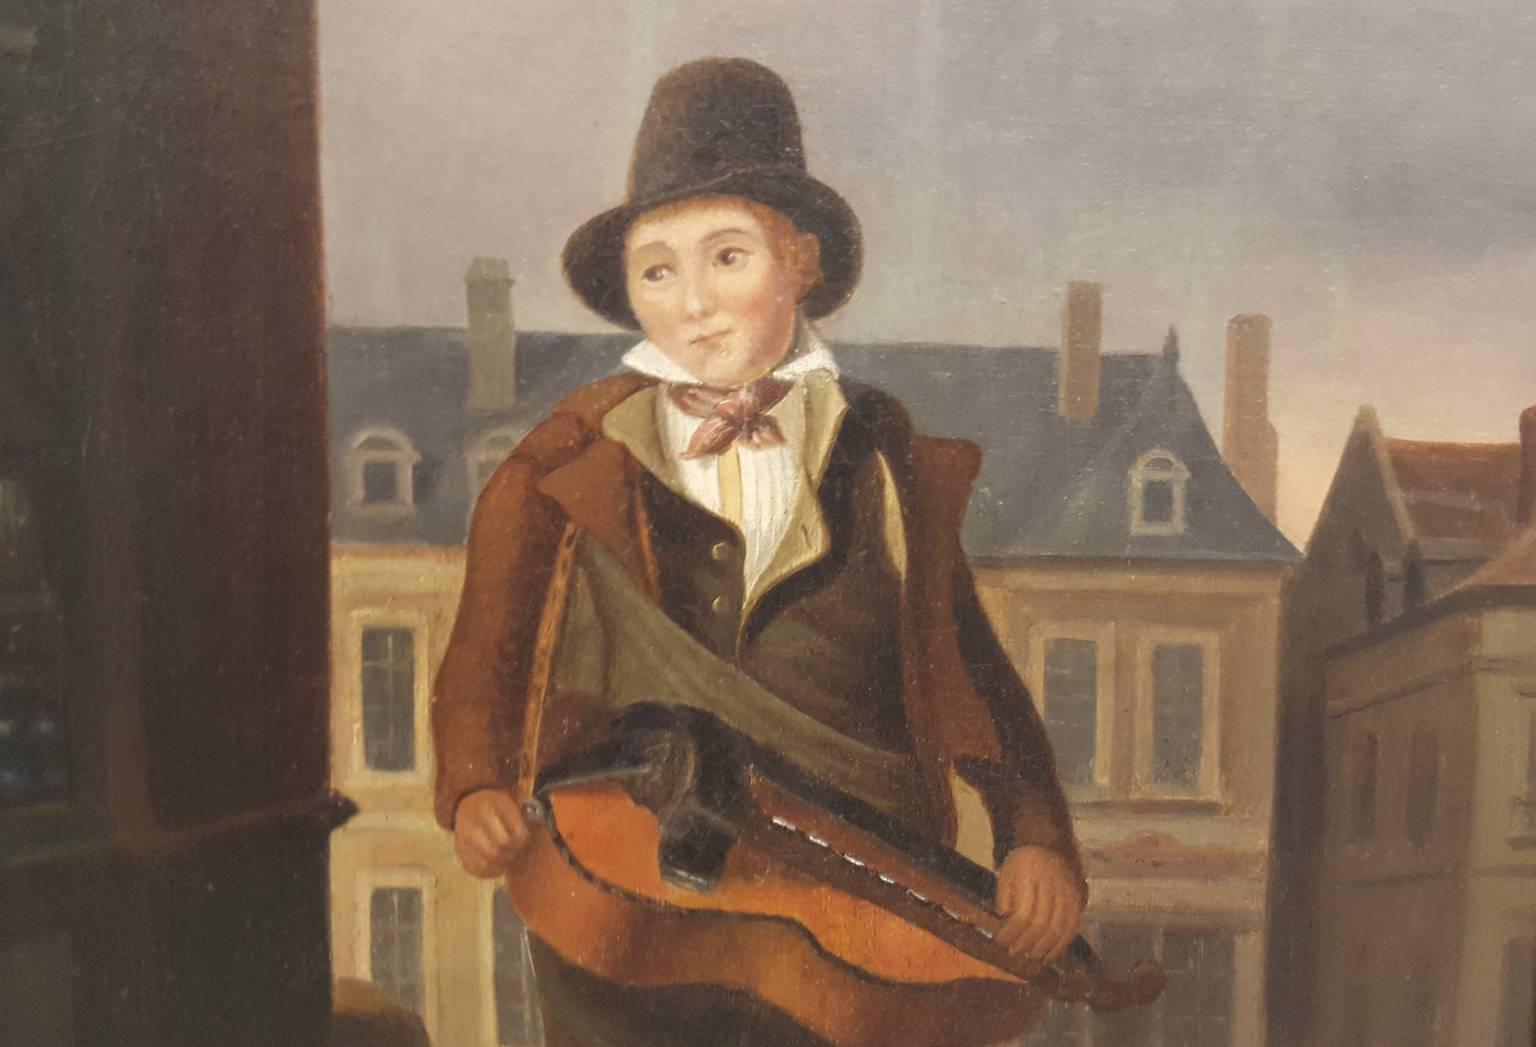 A small oil painting in excellent condition with canvas remounted. It is framed in a gold leafed frame, perhaps the original. It is signed by the artist on the lower left, however the painter's name is illegible. The subject is of a musician on a